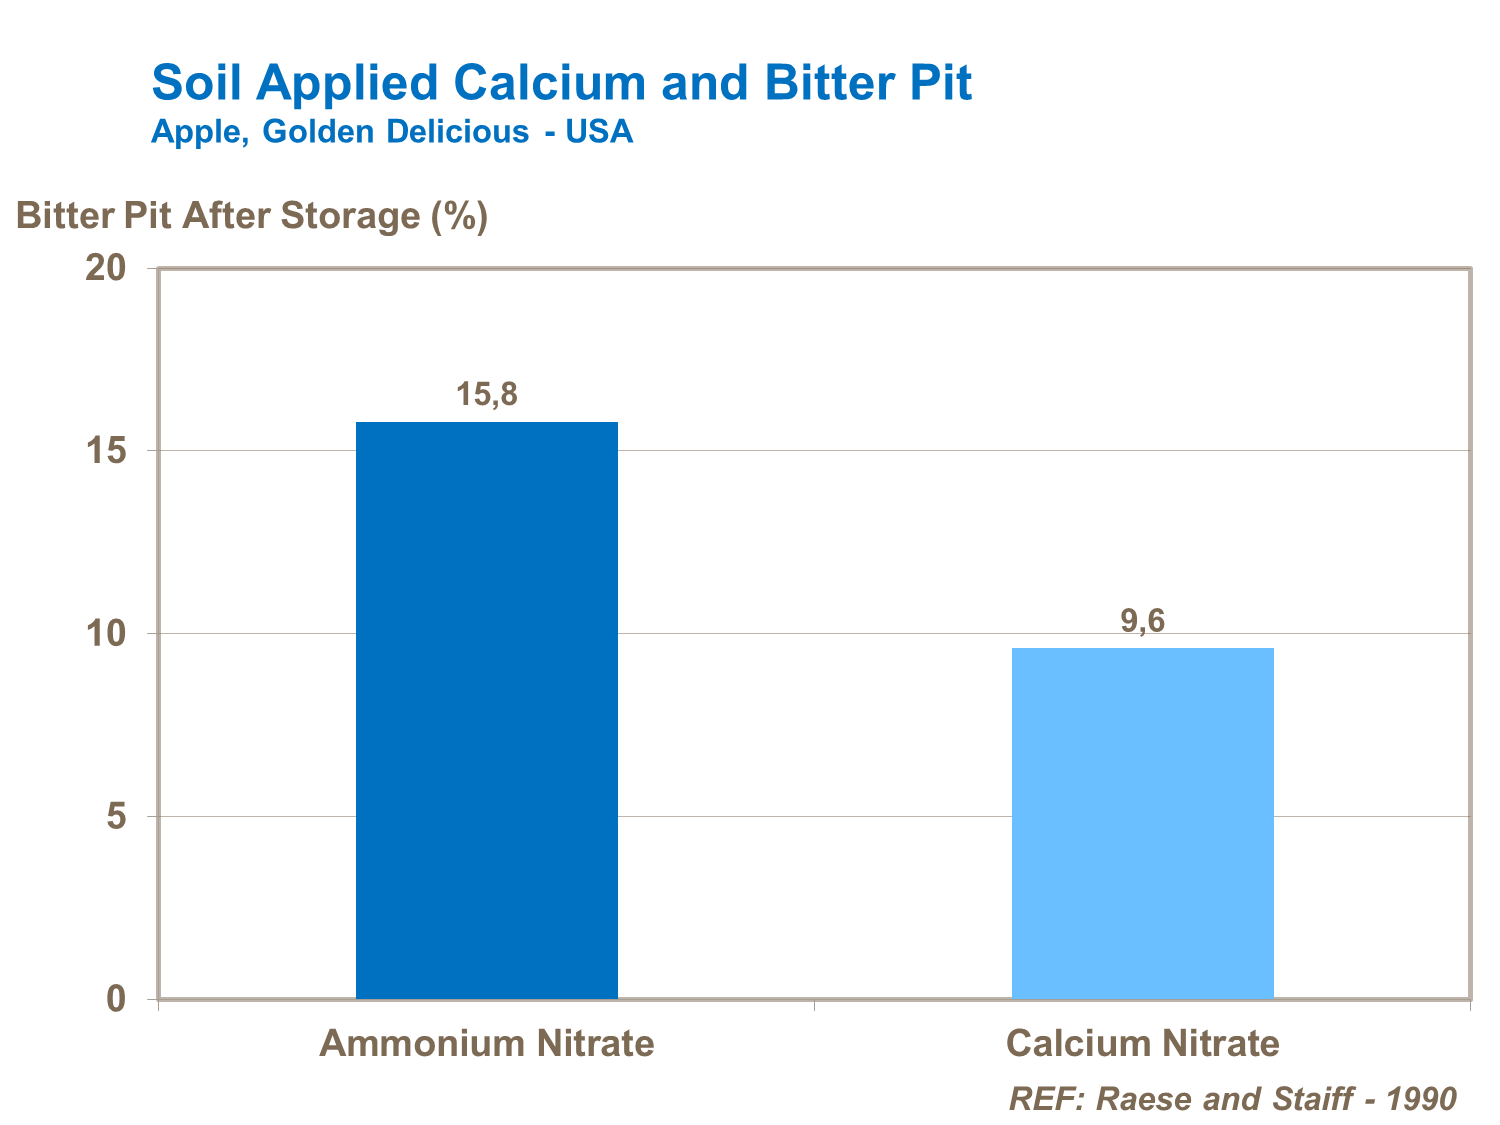 Soil applied calcium and bitter pit